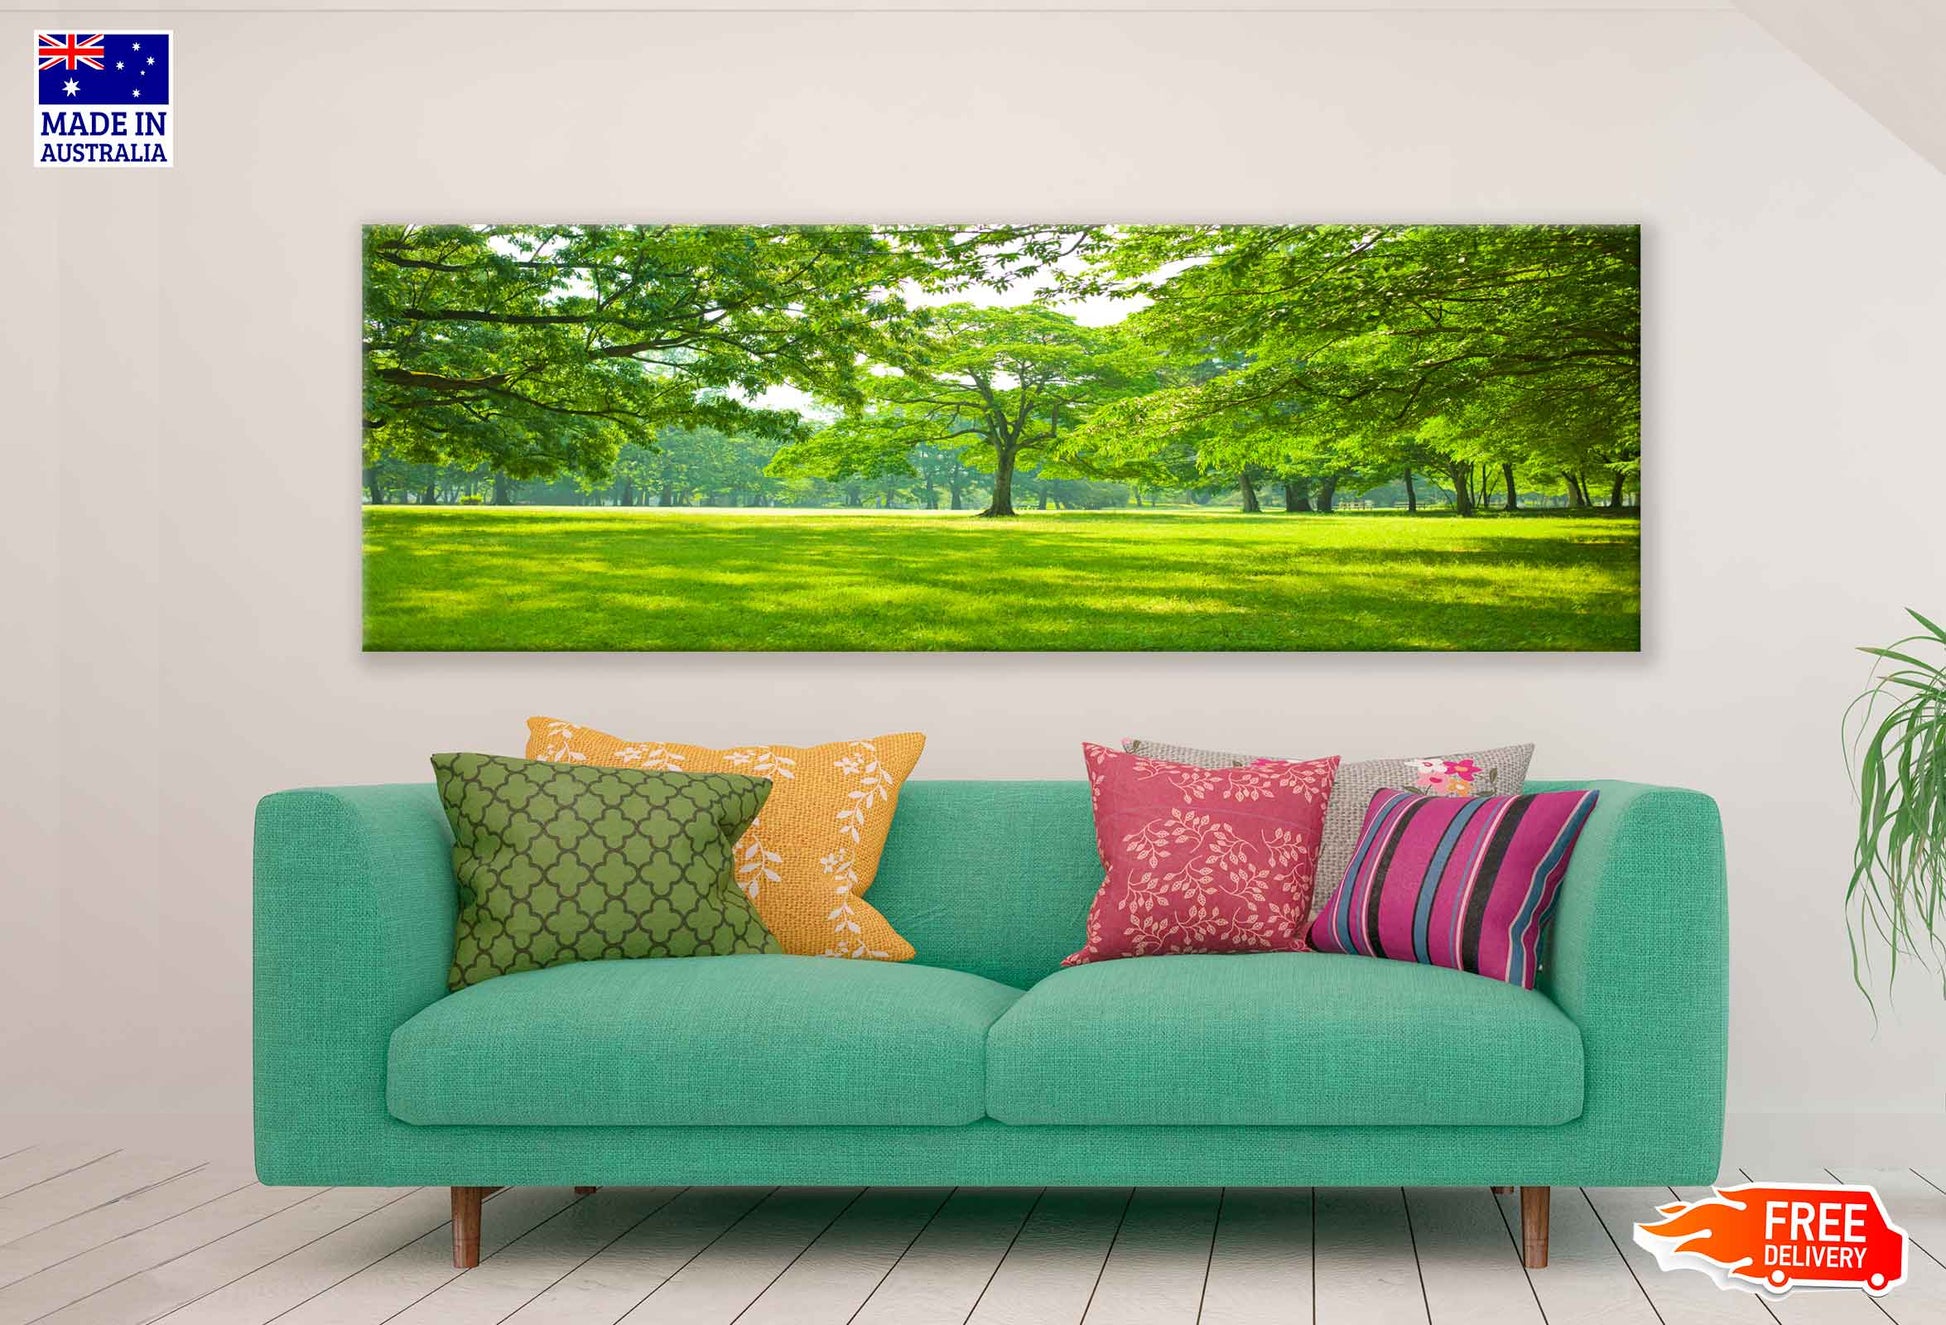 Panoramic Canvas Sunny Garden With Big Trees High Quality 100% Australian Made Wall Canvas Print Ready to Hang